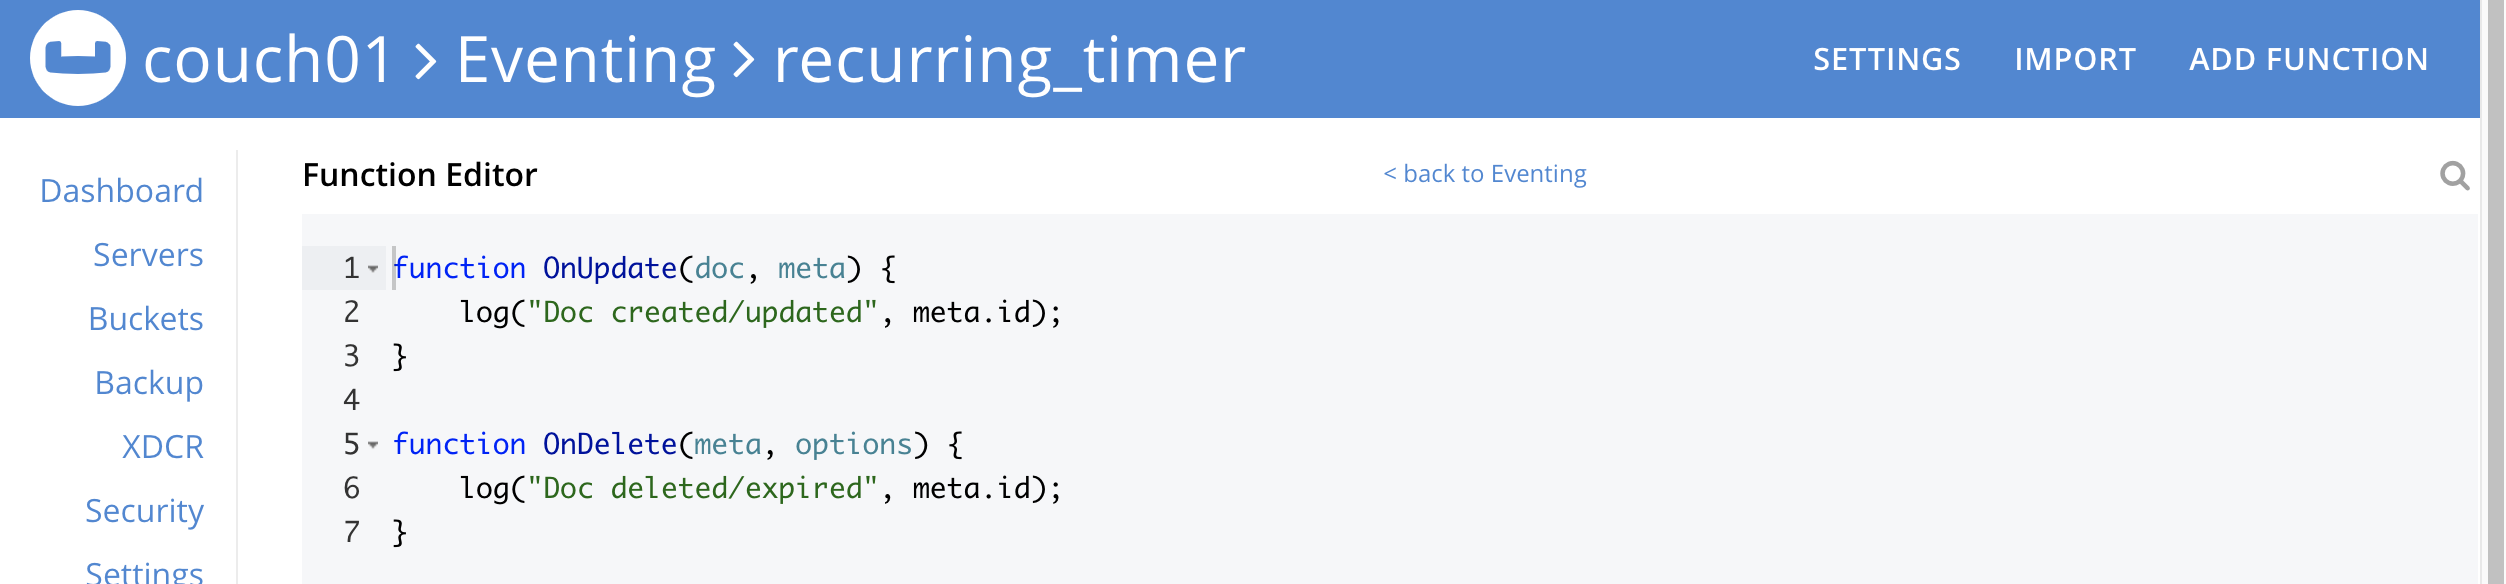 recurring timer 02 editor with default